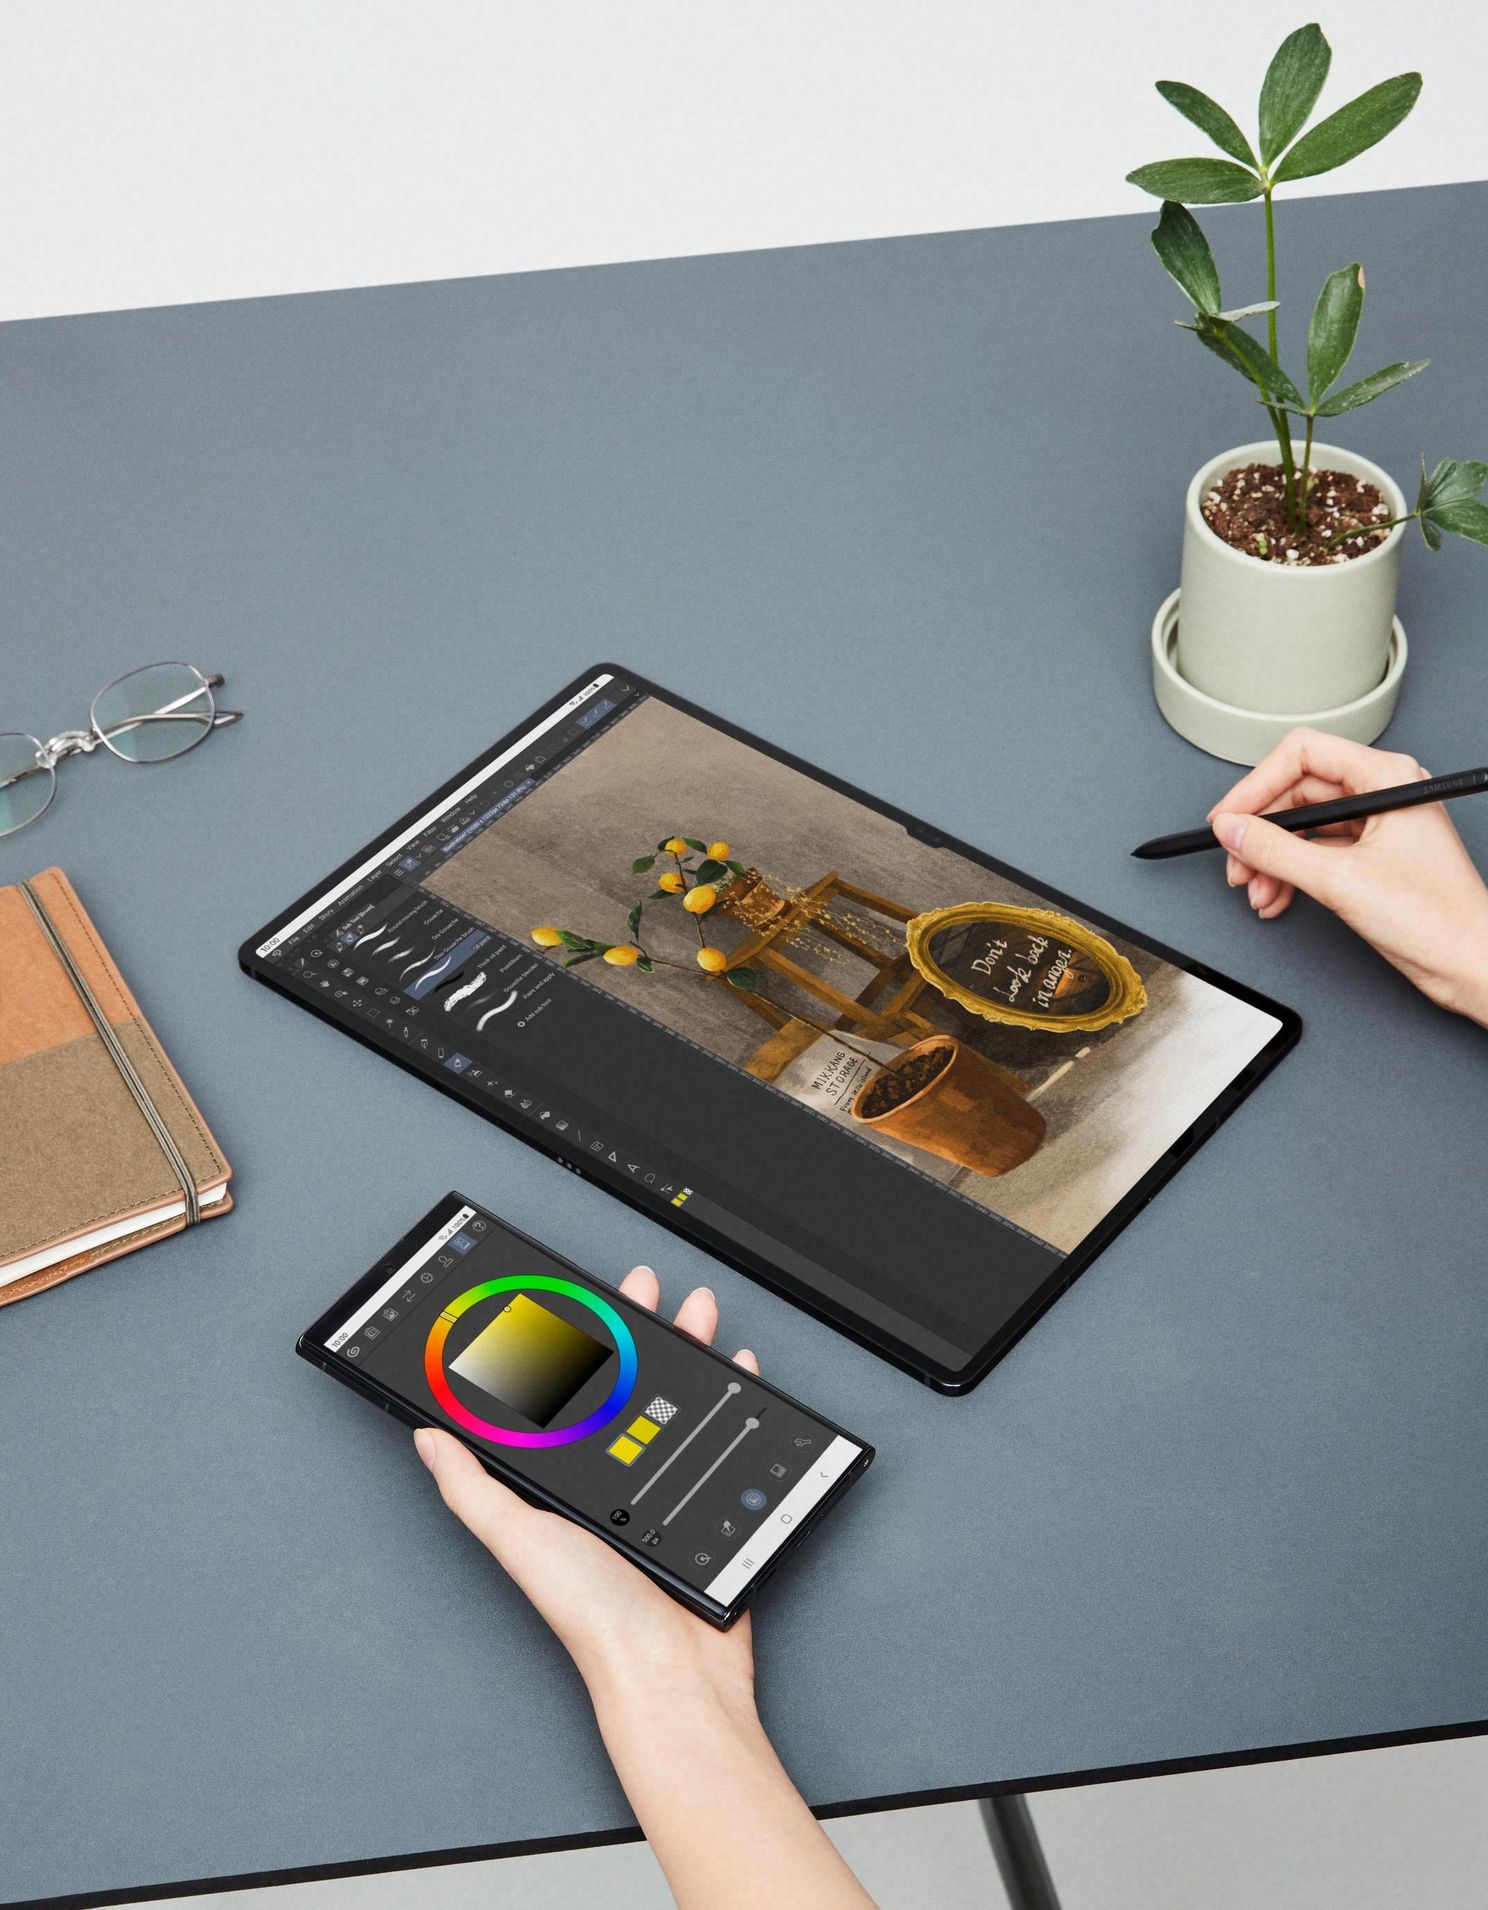 Activating Clip Studio Paint on the Samsung Galaxy Tab S8: this is how it works